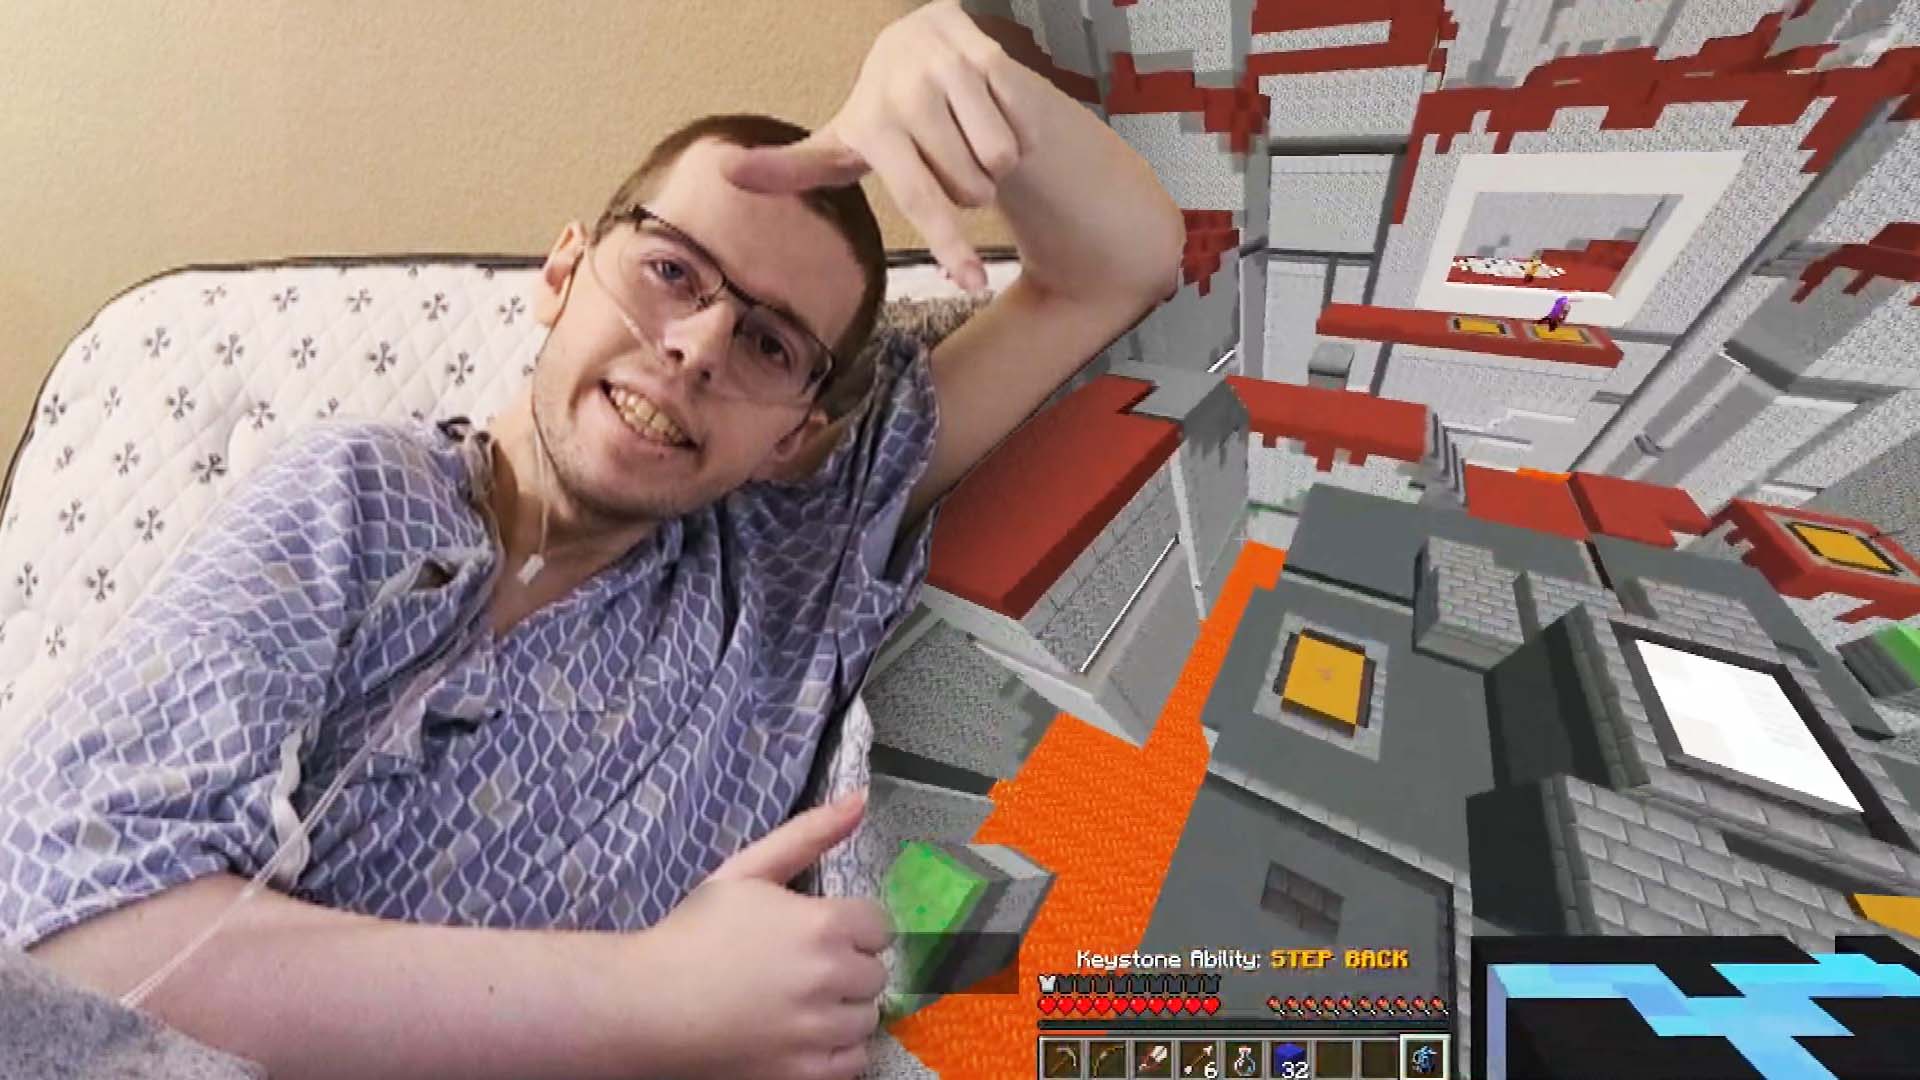 Who is Technoblade, Minecraft streamer who died from cancer at 23